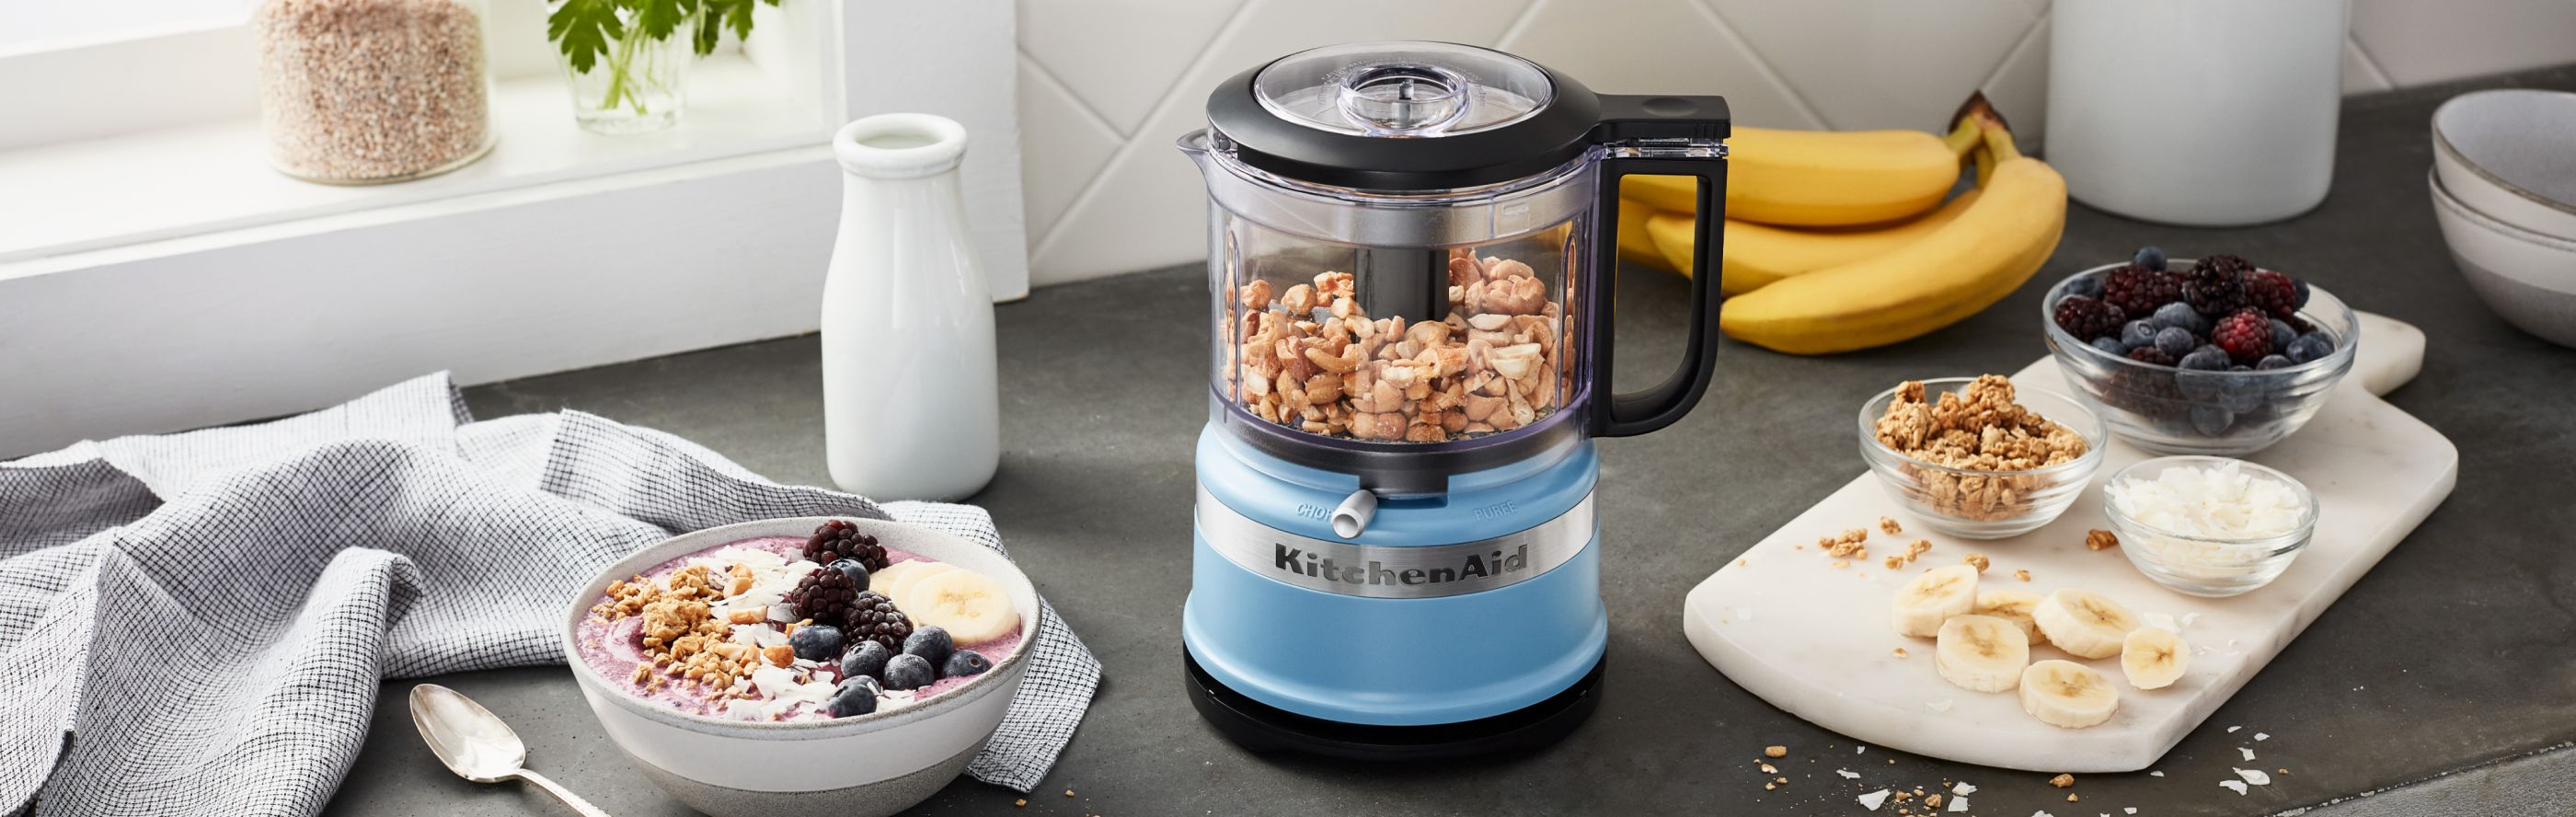 A KitchenAid® food processor with ground almonds and ground-almond dish